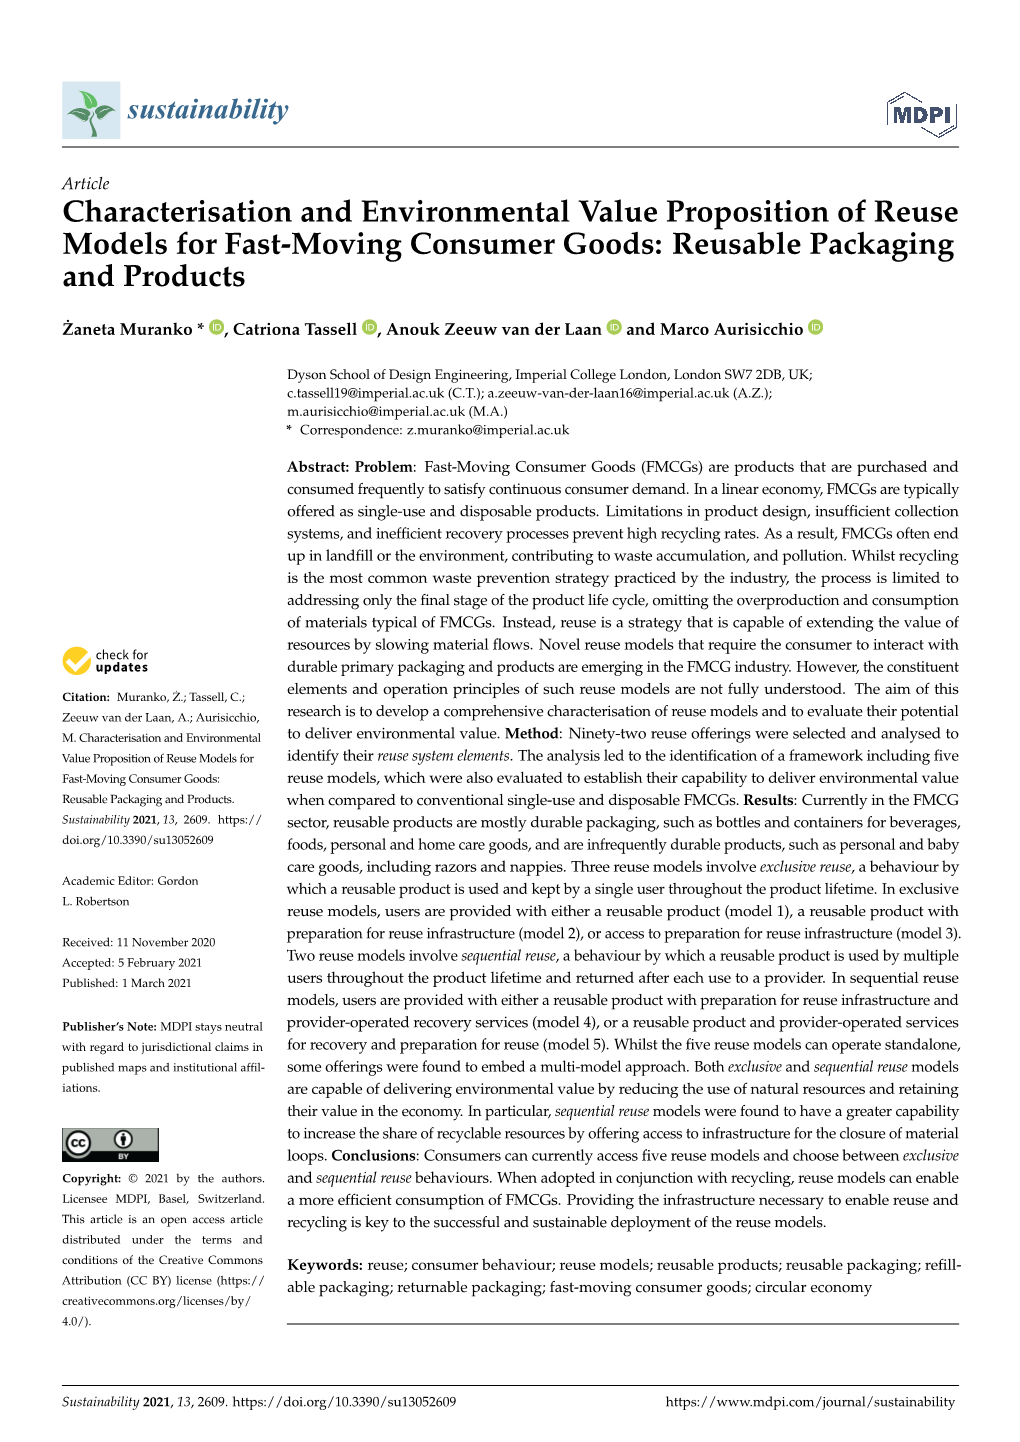 Characterisation and Environmental Value Proposition of Reuse Models for Fast-Moving Consumer Goods: Reusable Packaging and Products